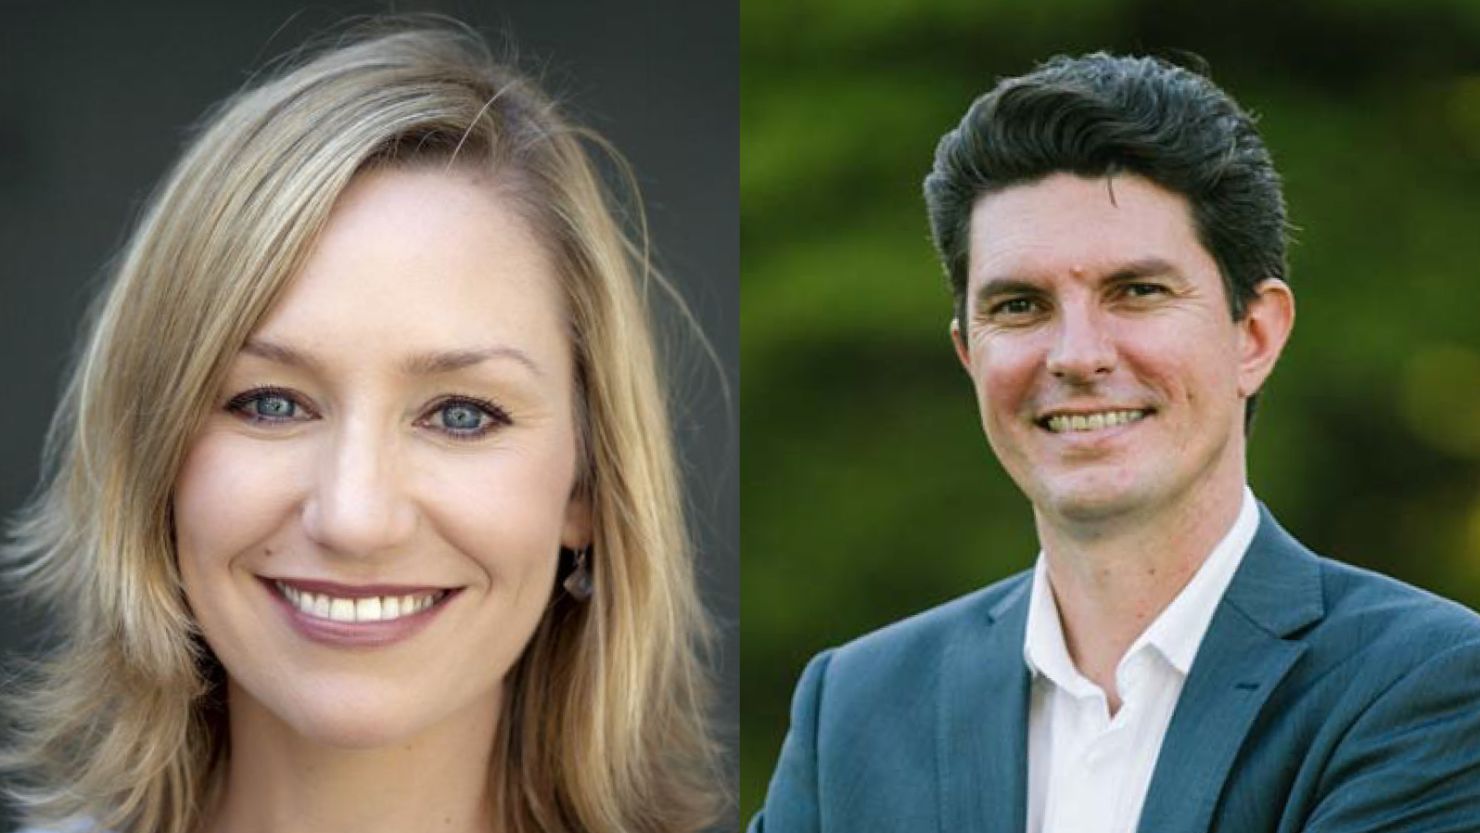 Larissa Waters and Scott Ludlam in handout photos from The Greens political party website.